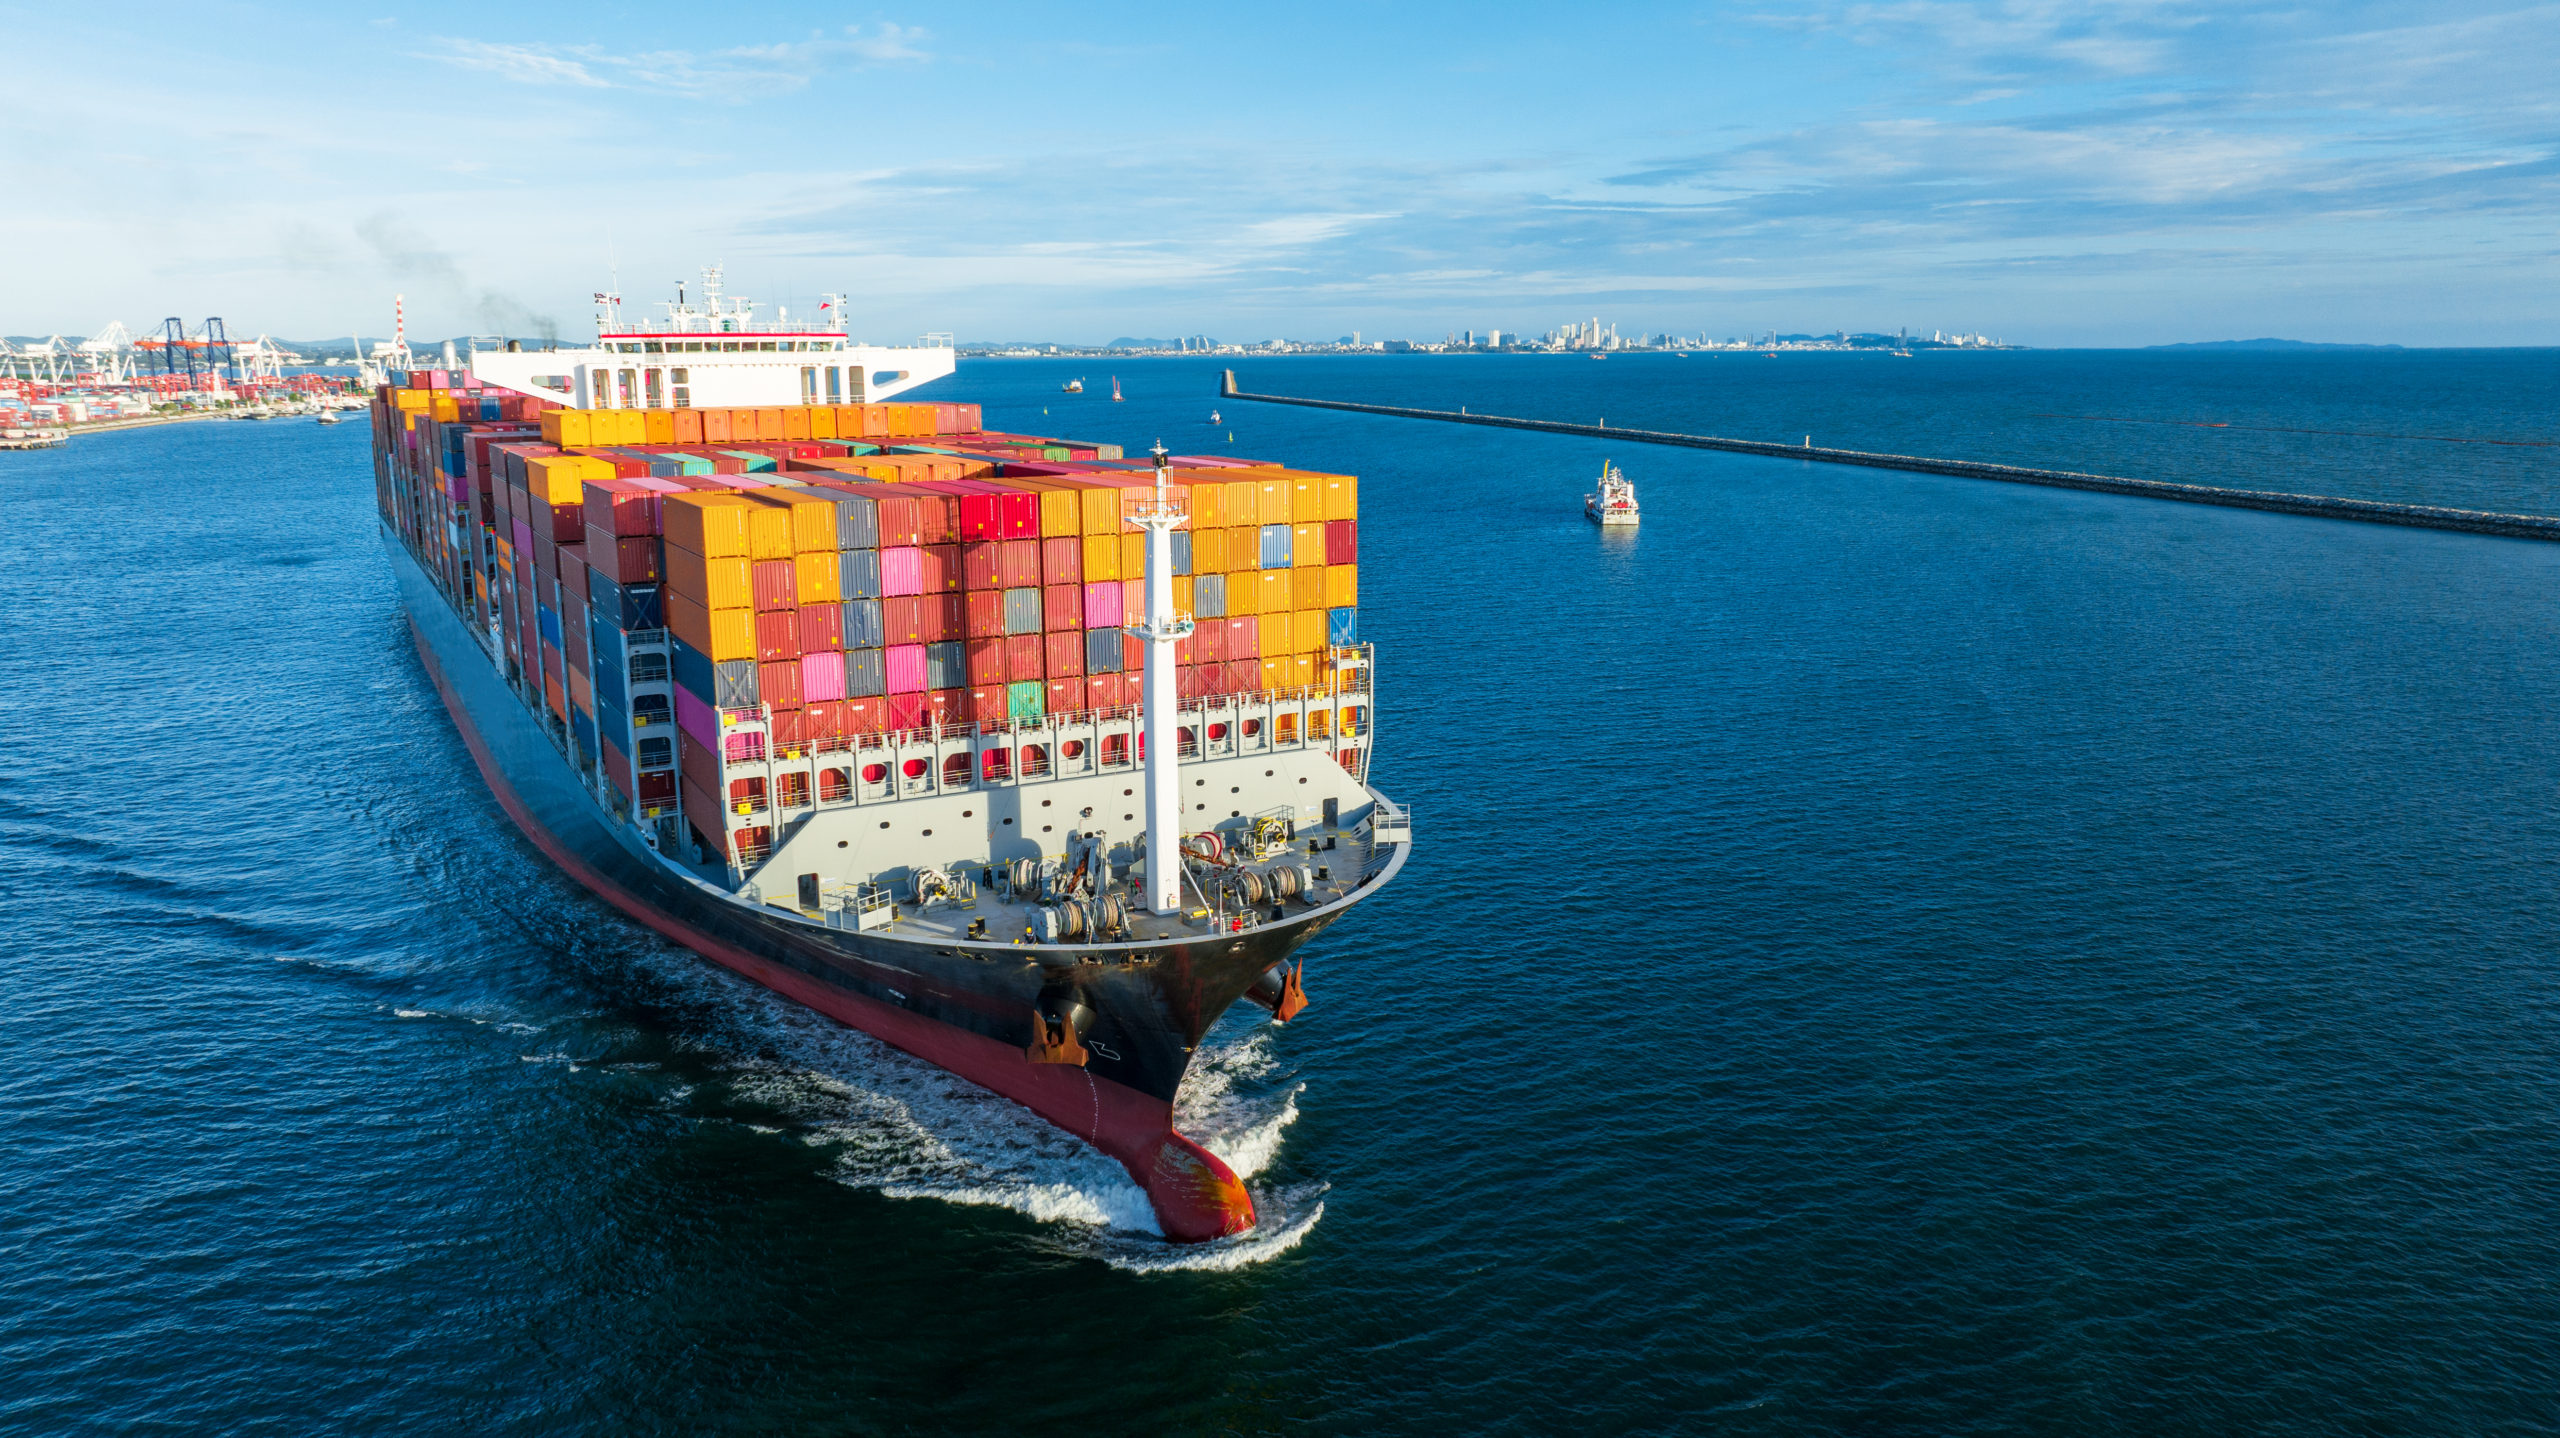 An aerial view of a cargo ship carrying containers